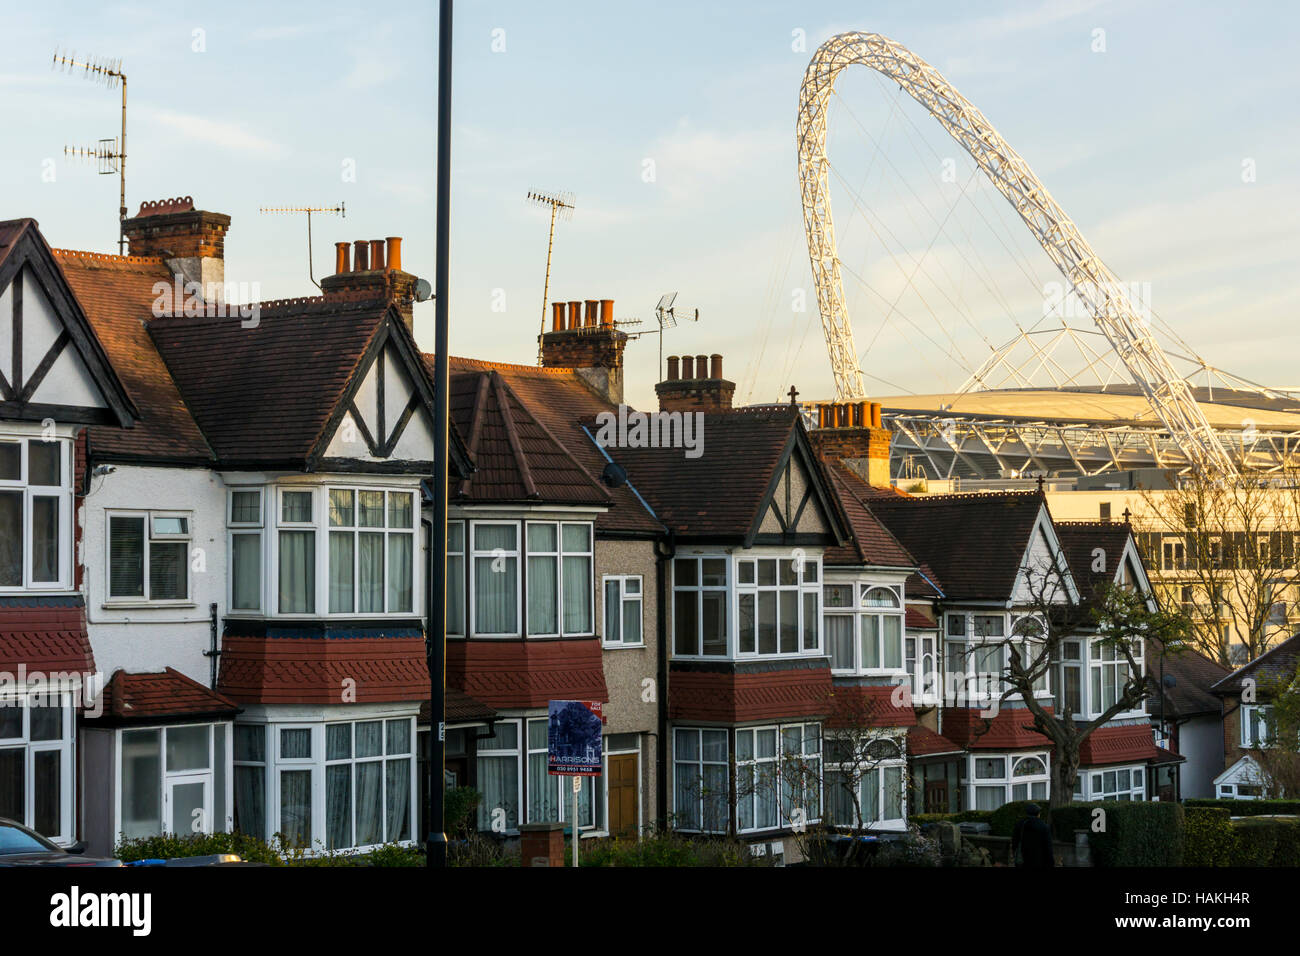 The arch of Wembley Stadium seen over the roofs of suburban houses Wembley, London. Stock Photo